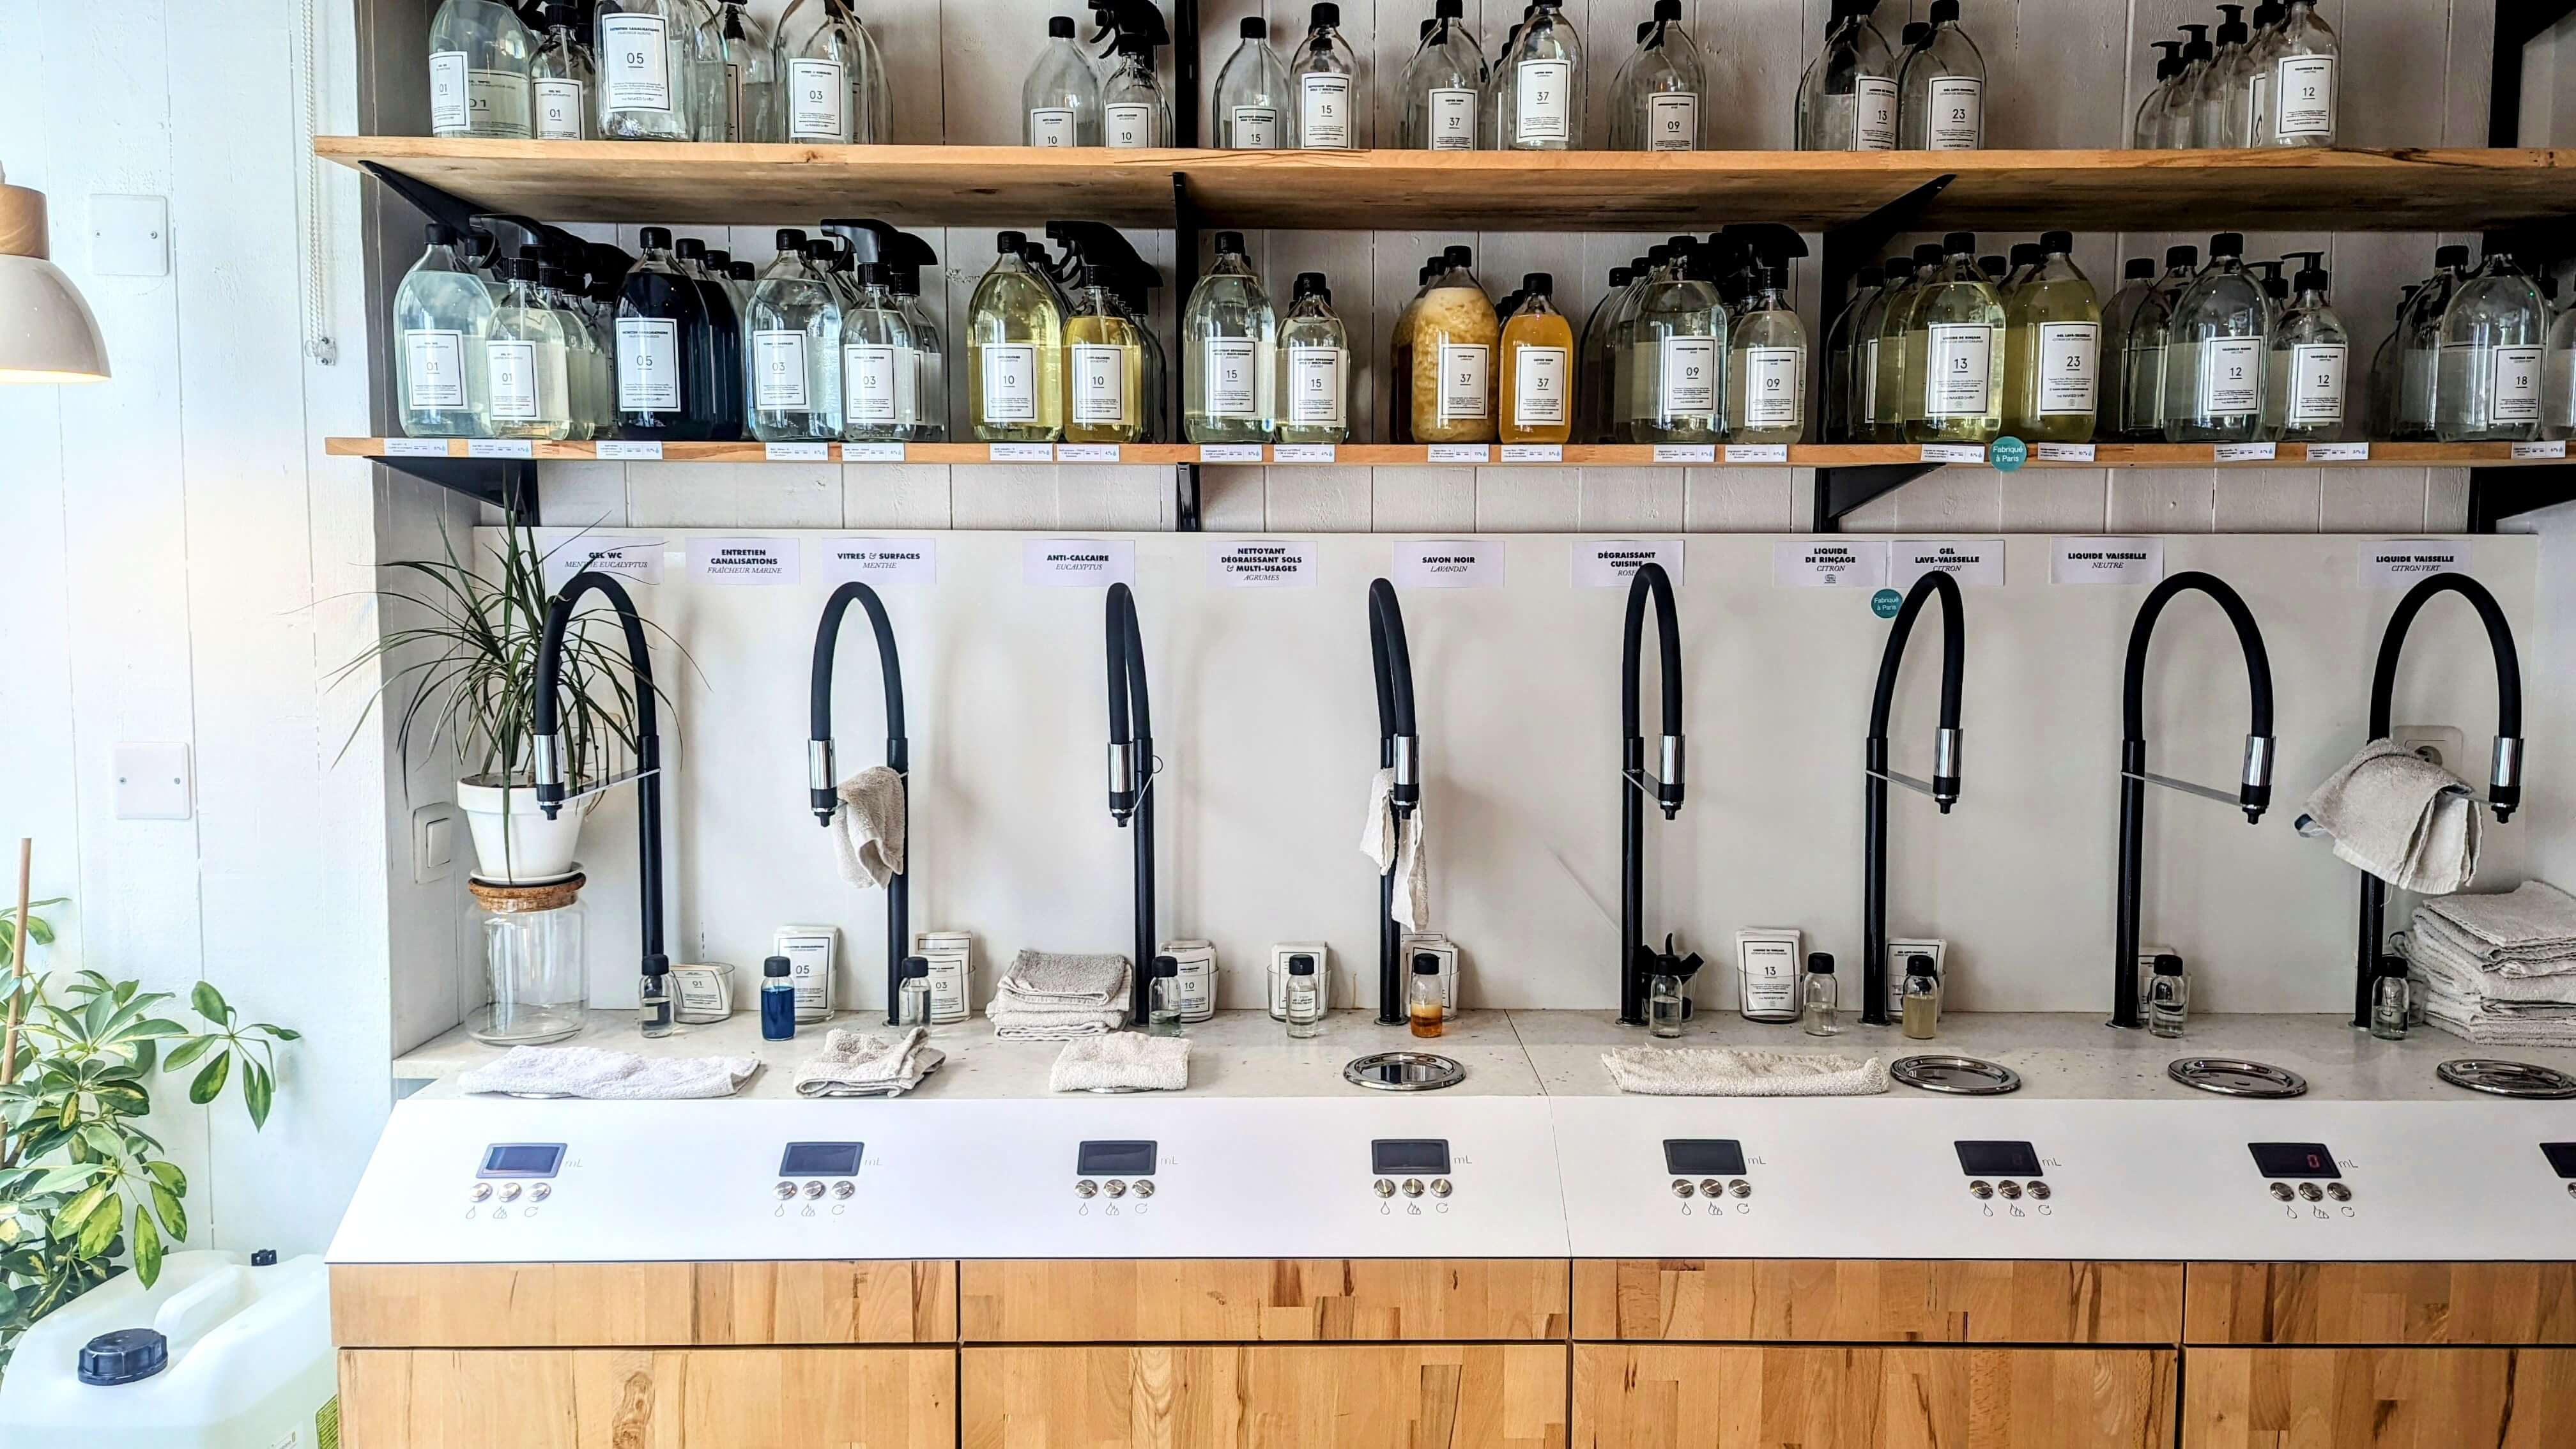 At The Naked Shop in Paris, liquids are sold from tap following a zero waste philosophy.